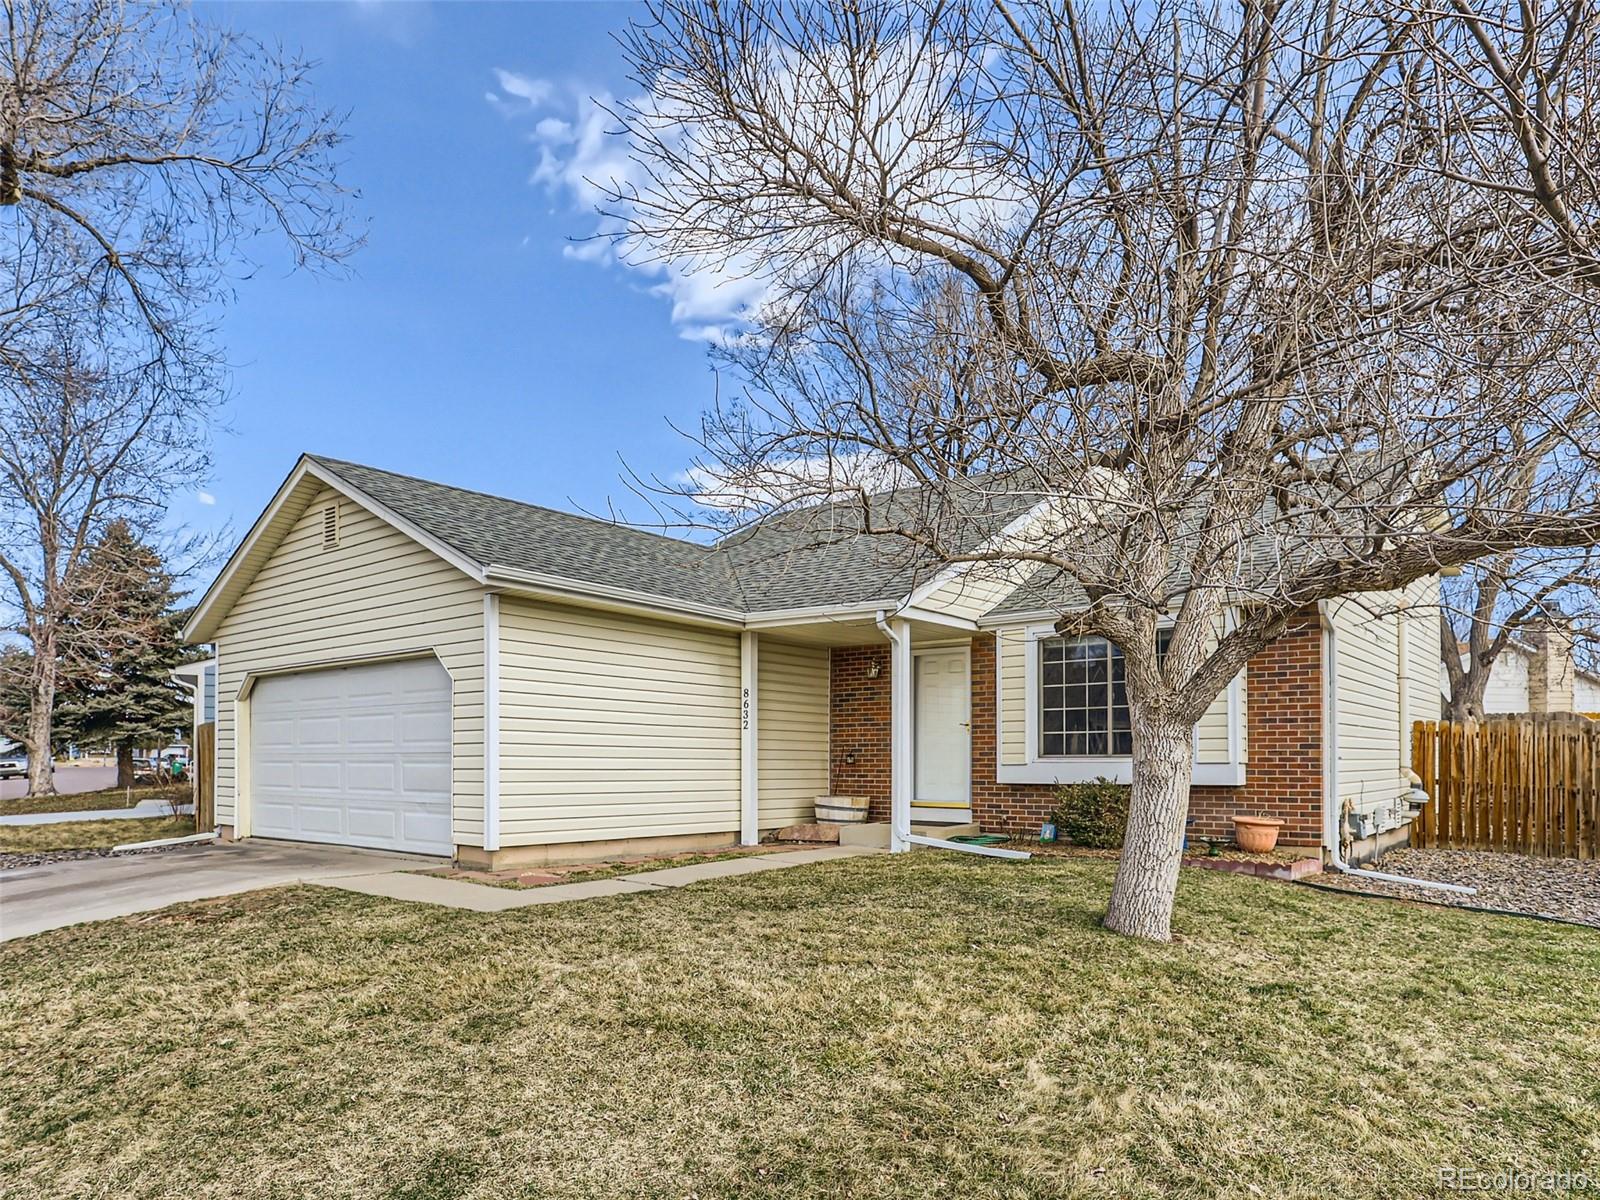 8632 w star circle, Littleton sold home. Closed on 2024-04-12 for $525,000.